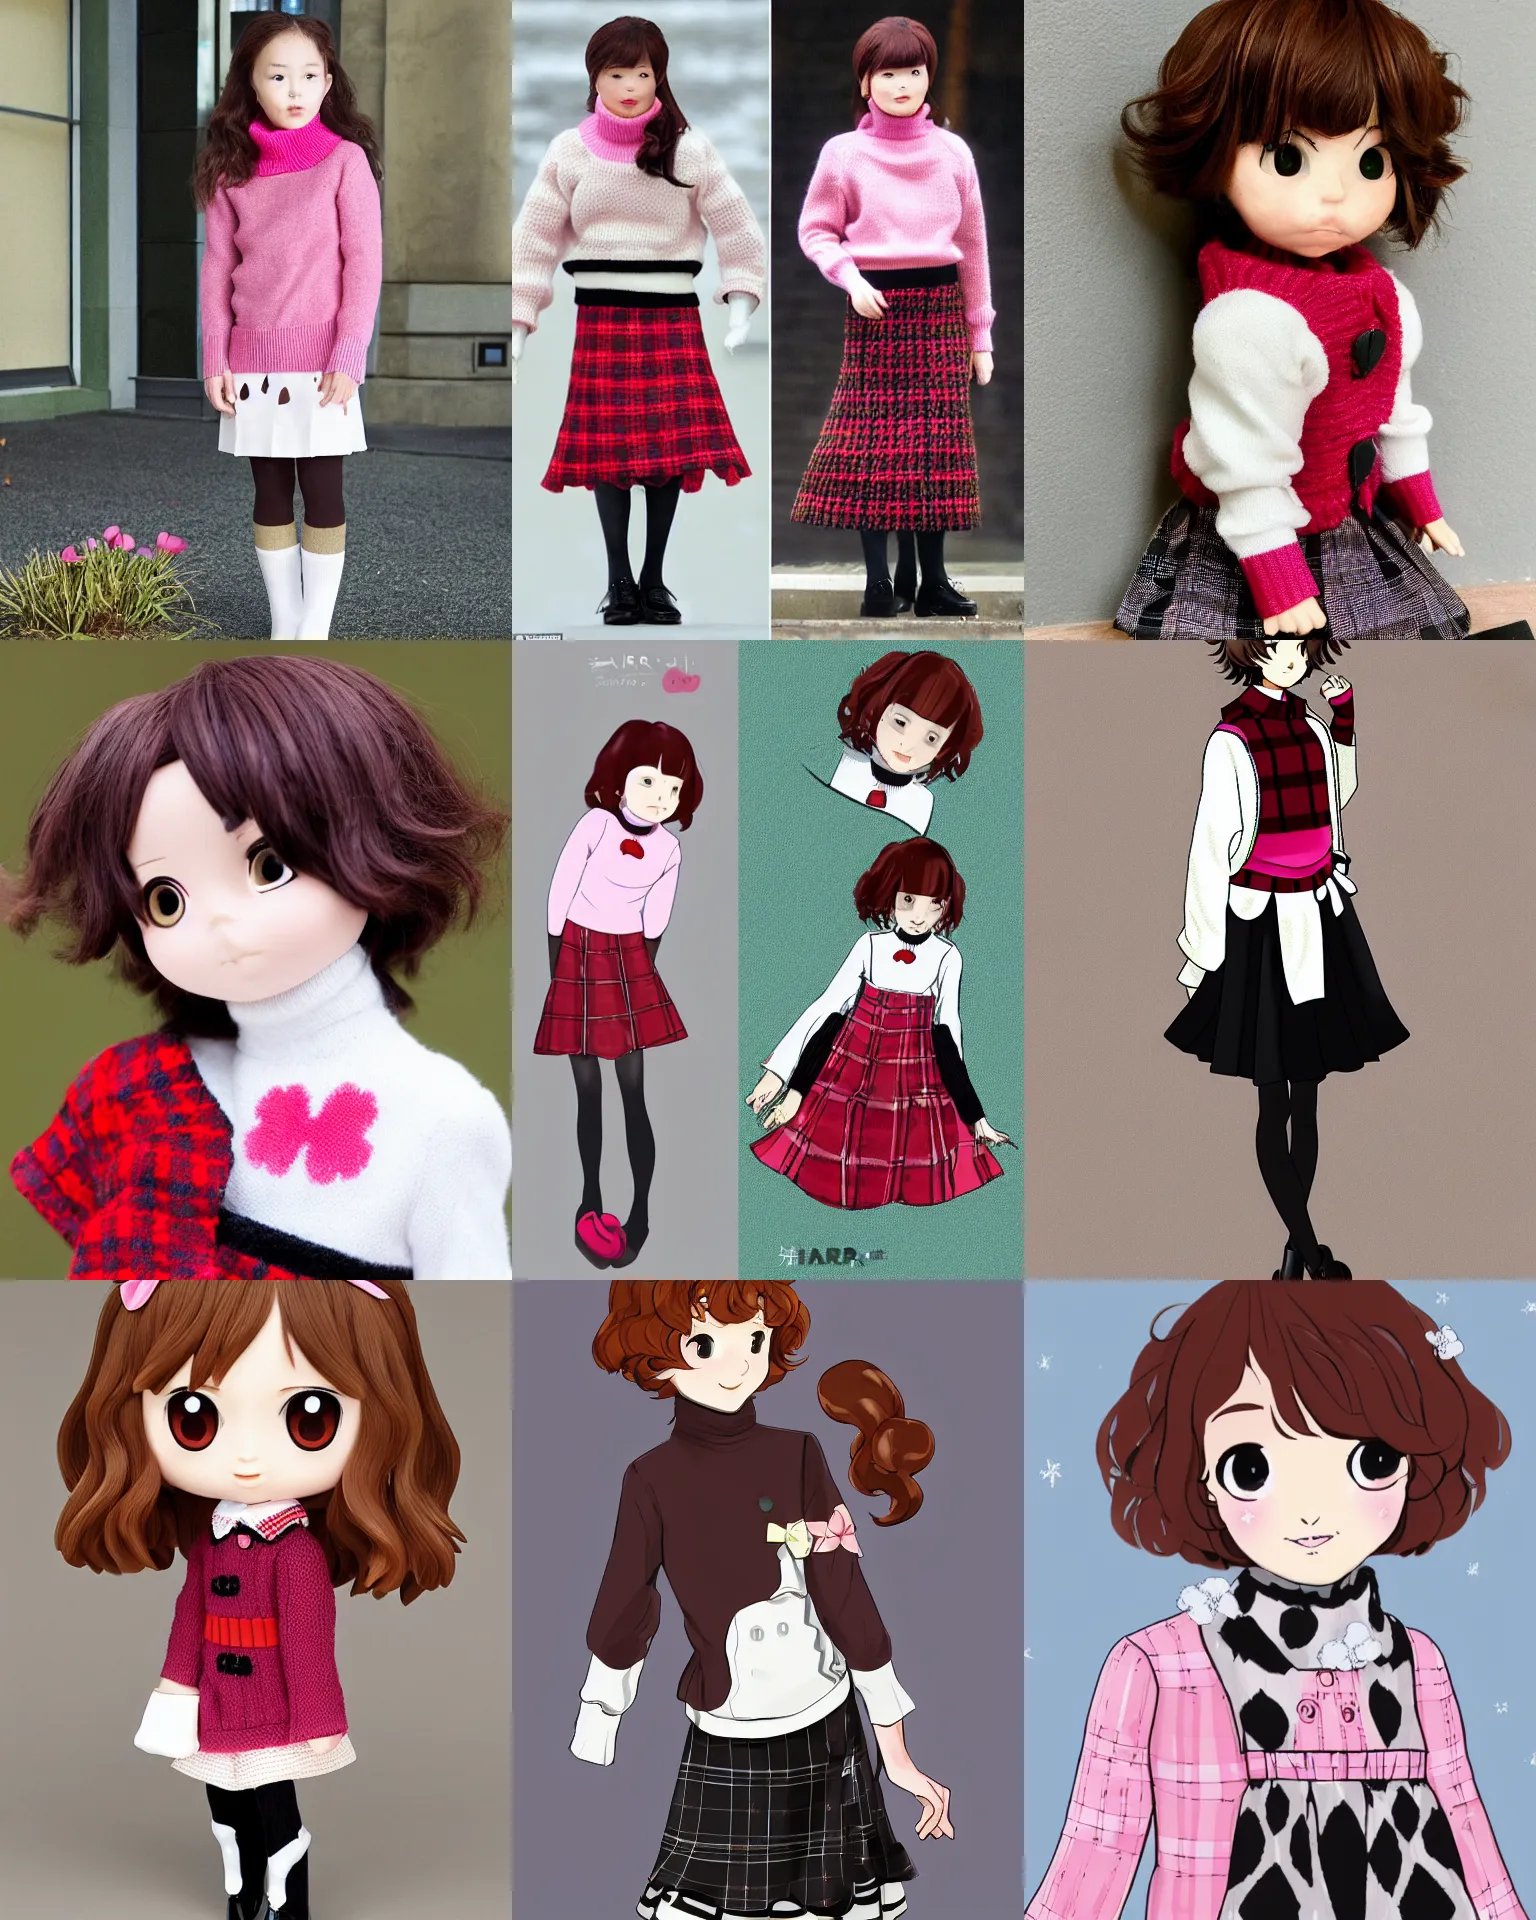 Prompt: haru has chin - length curly light auburn hair and brown eyes. she wears a pink turtleneck cardigan with short puffed sleeves and a long - sleeved white shirt underneath. she wears the standard black and red tartan skirt, white tights with a black flower pattern and black mary jane shoes.